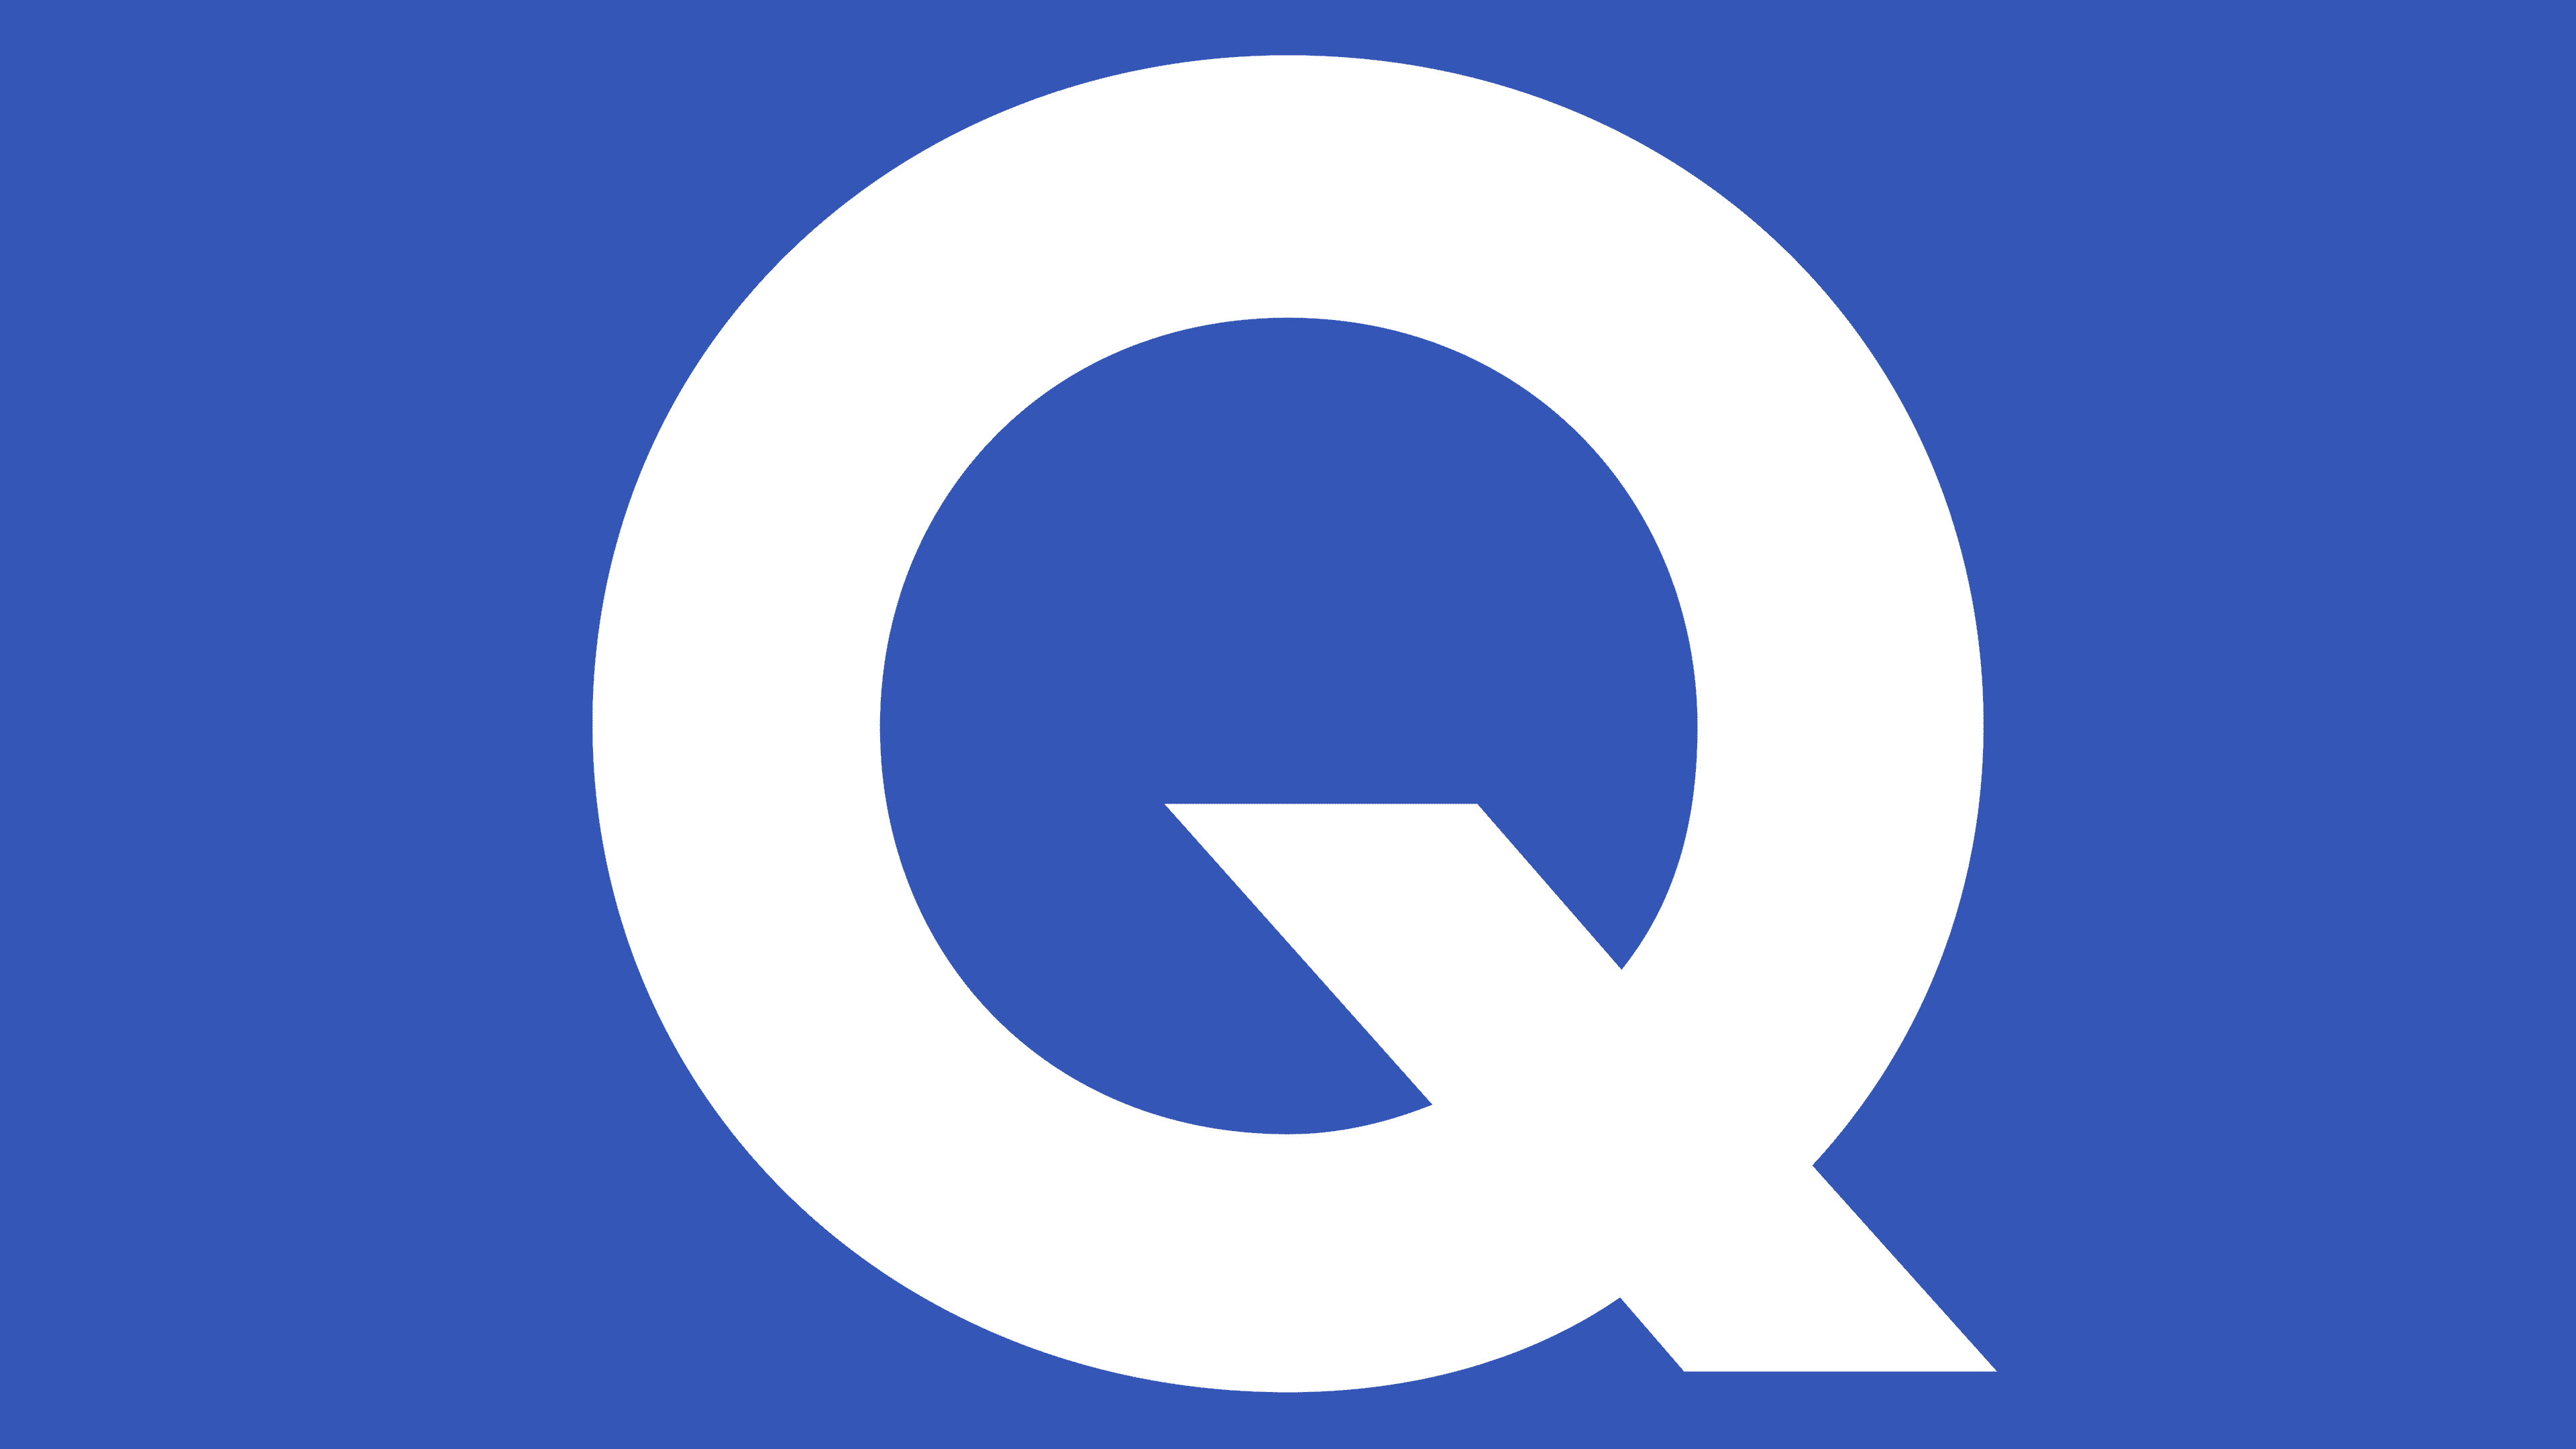 Quizlet Logo, symbol, meaning, history, PNG, brand